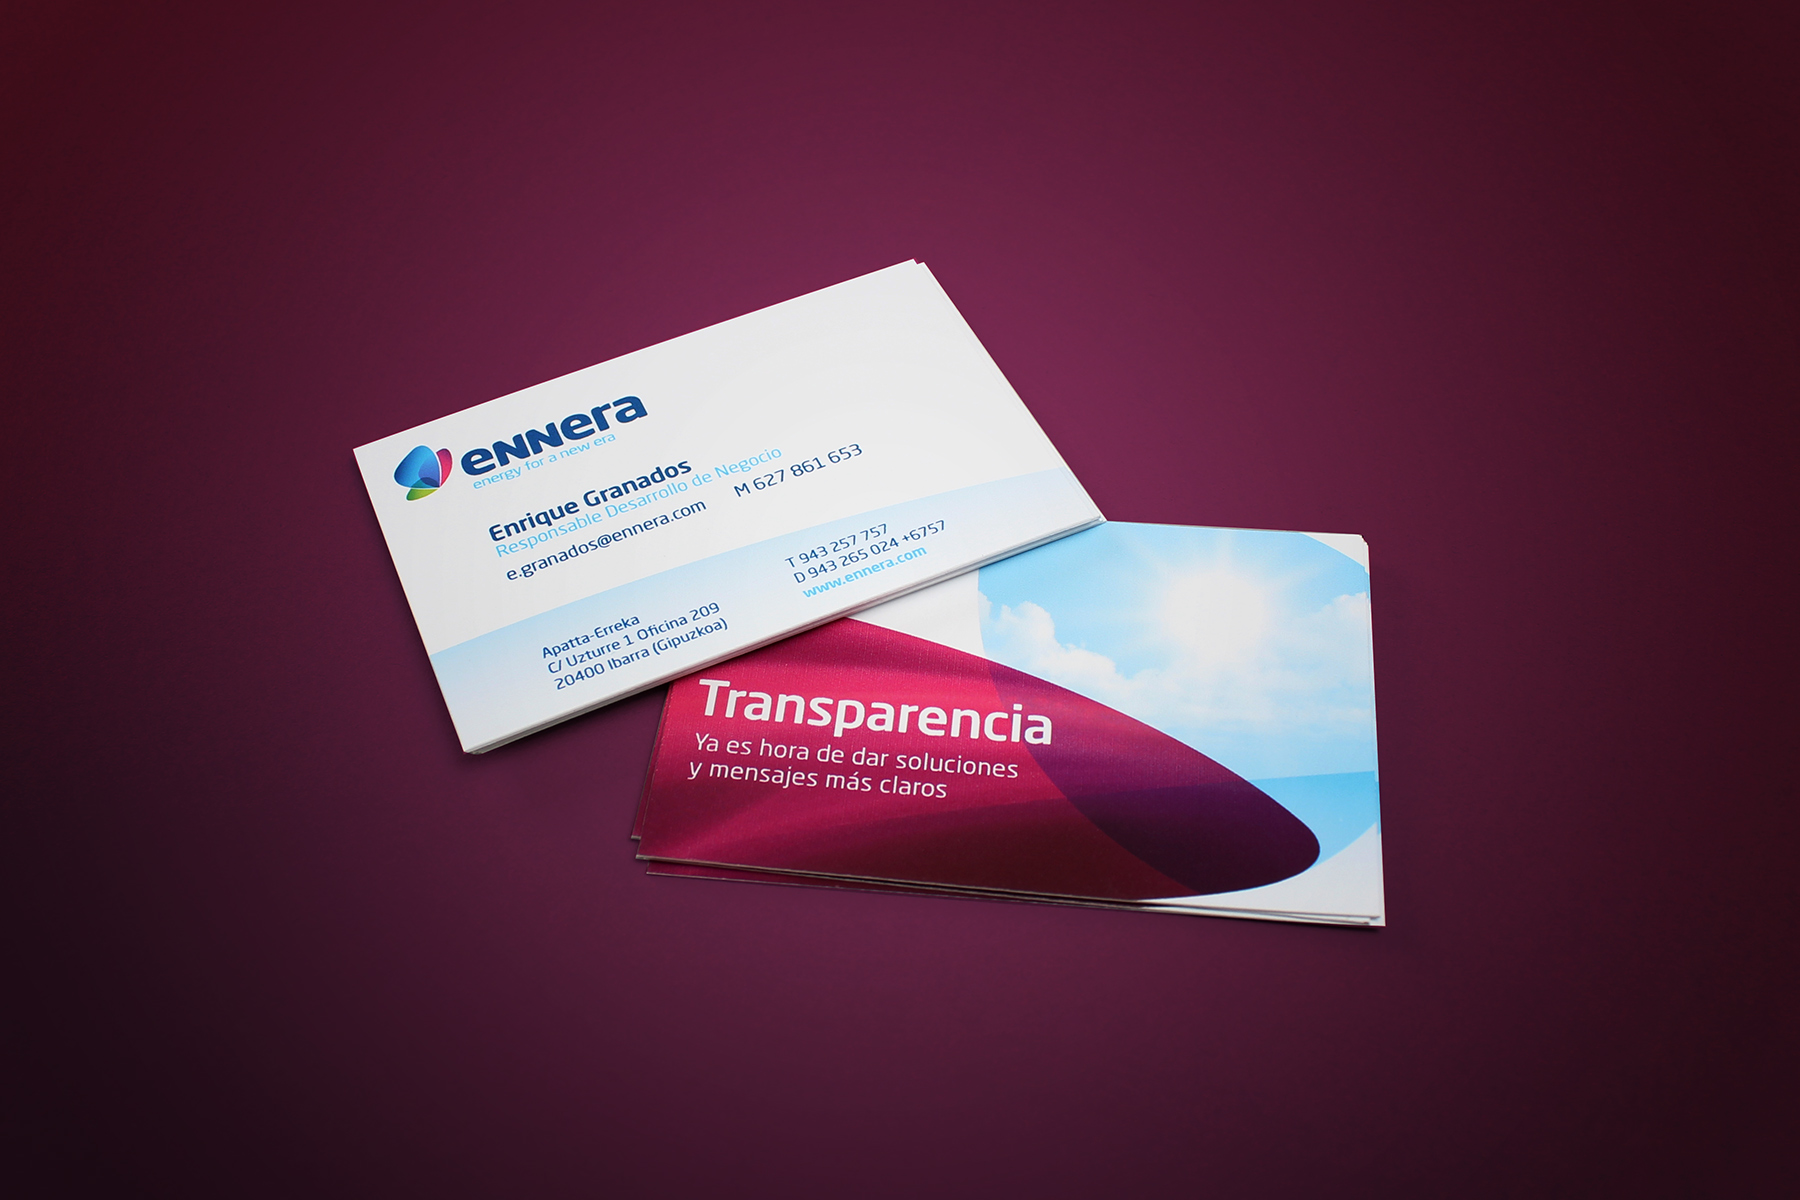 The business cards and stationery conveyed both functional and also sales information.